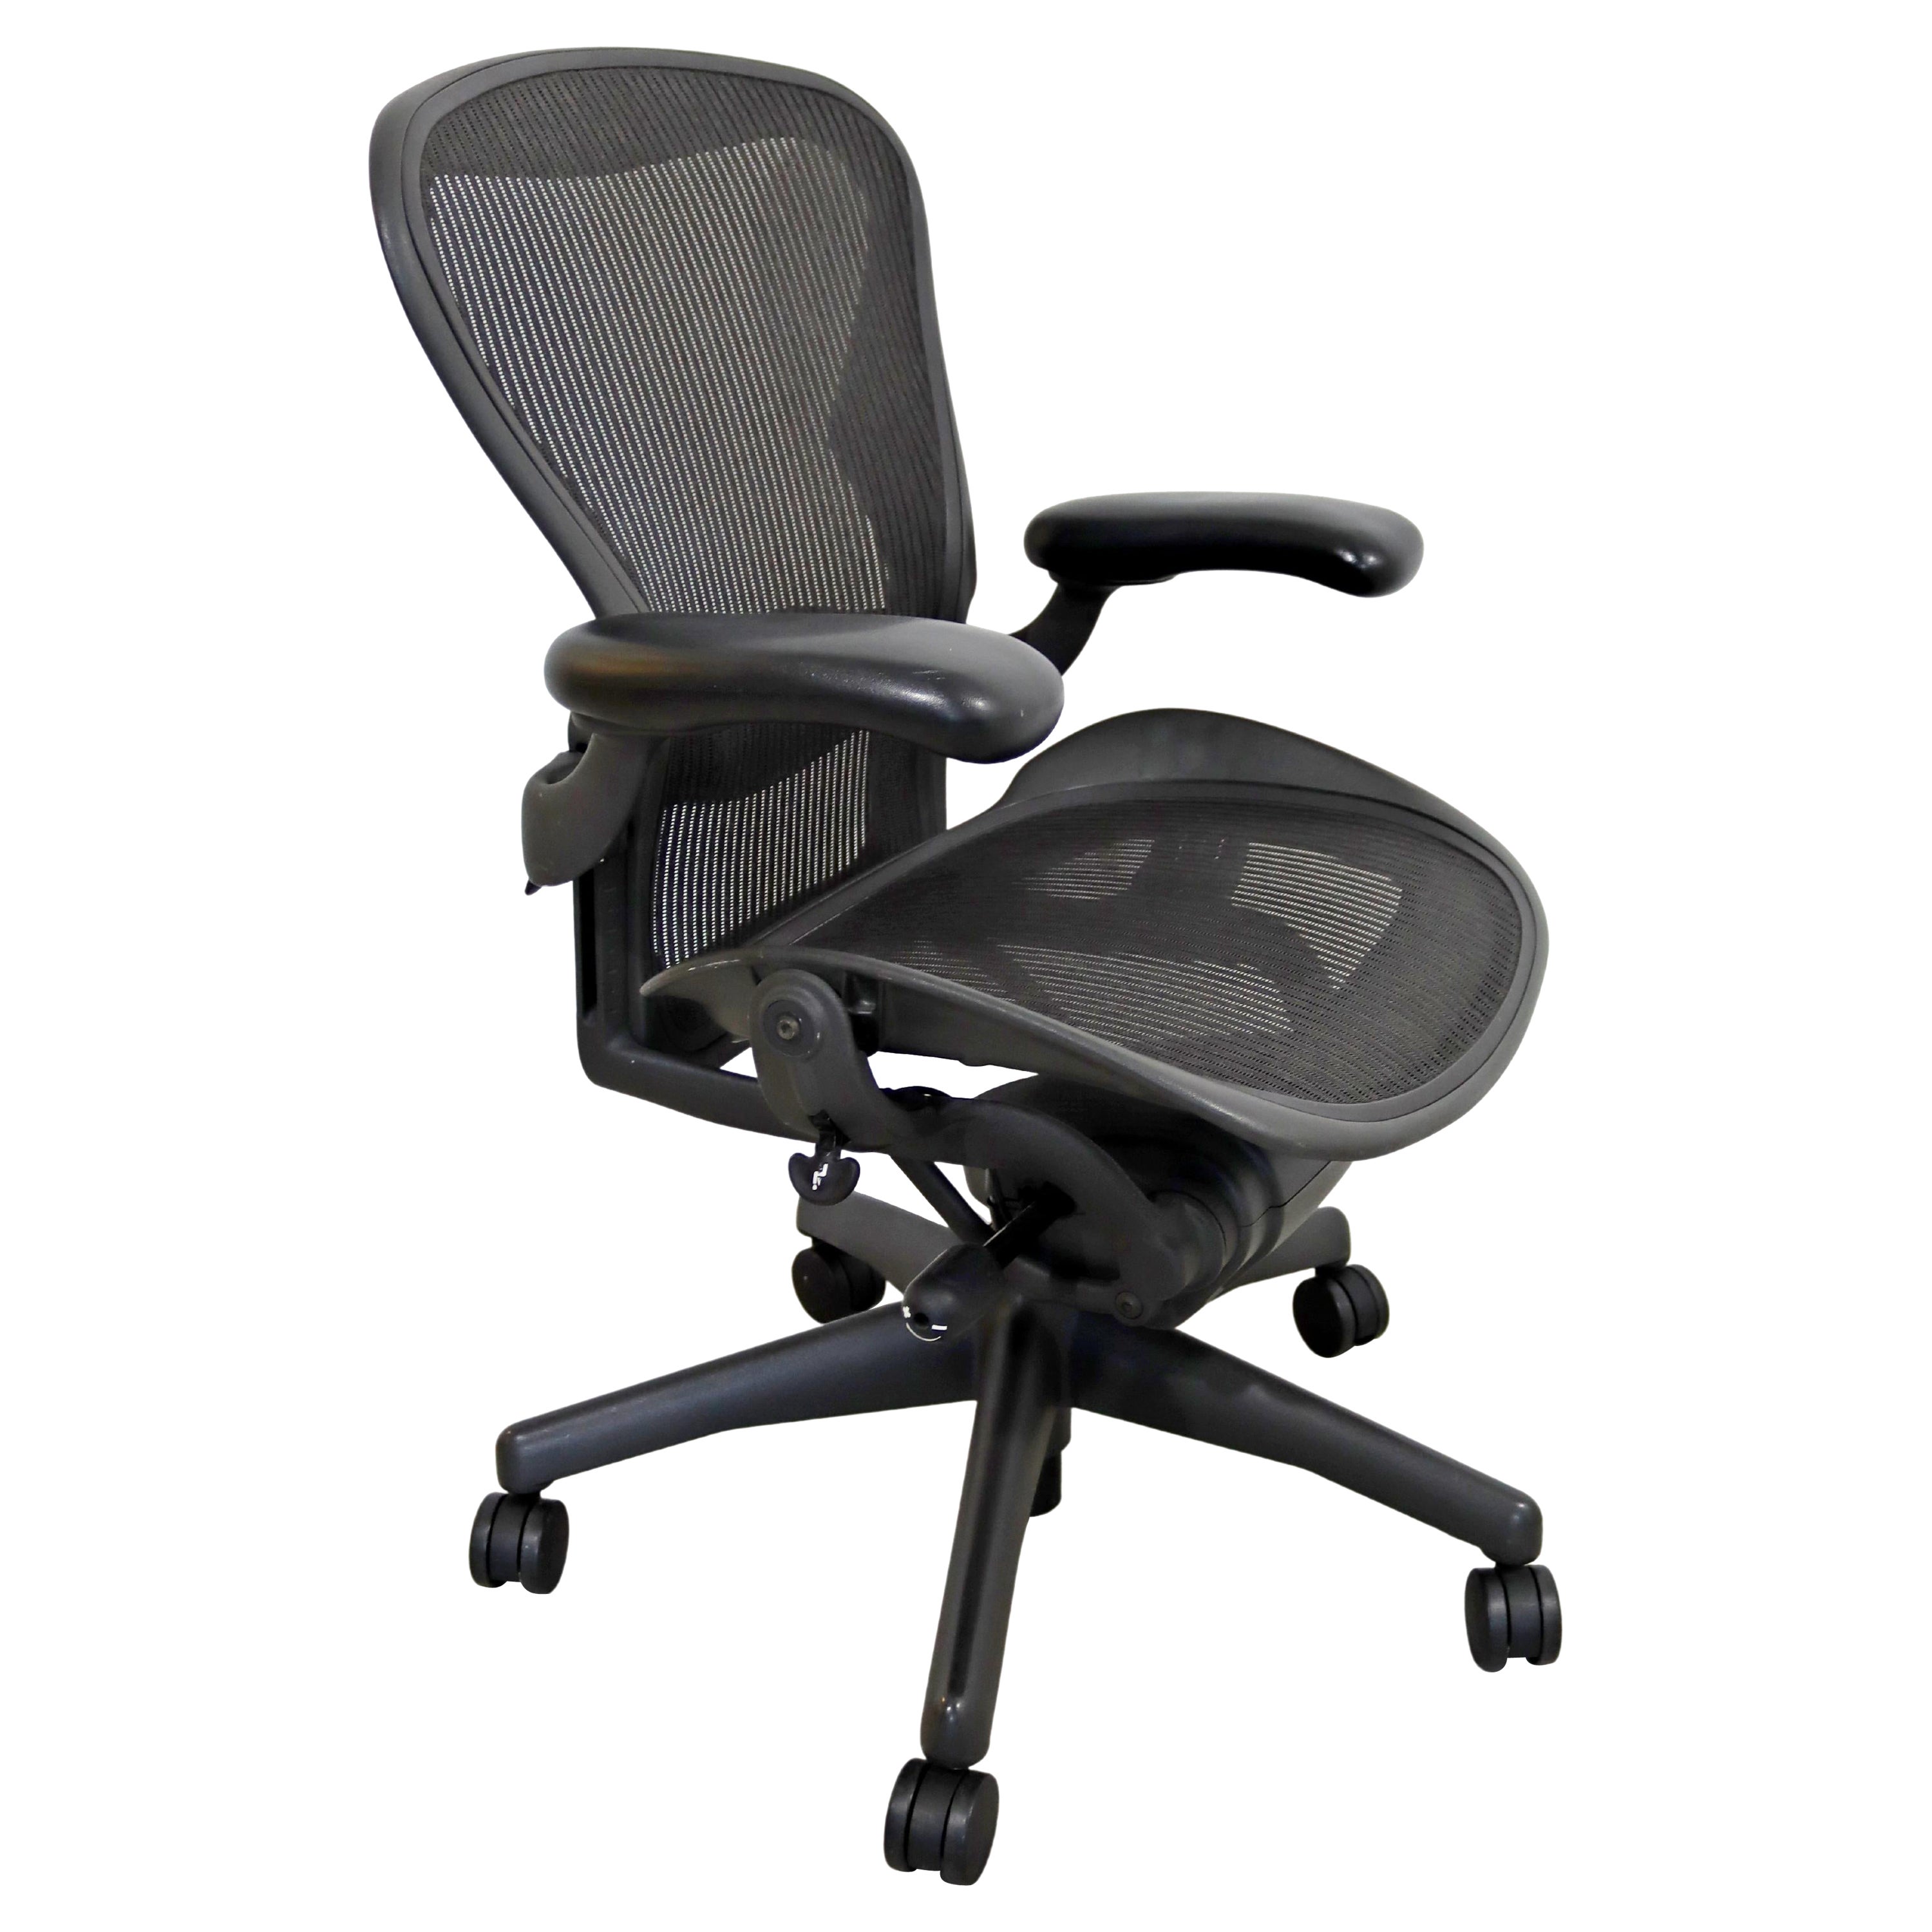 Contemporary Herman Miller Aeron Rolling Swivel Adjustable Office Chair 1990s